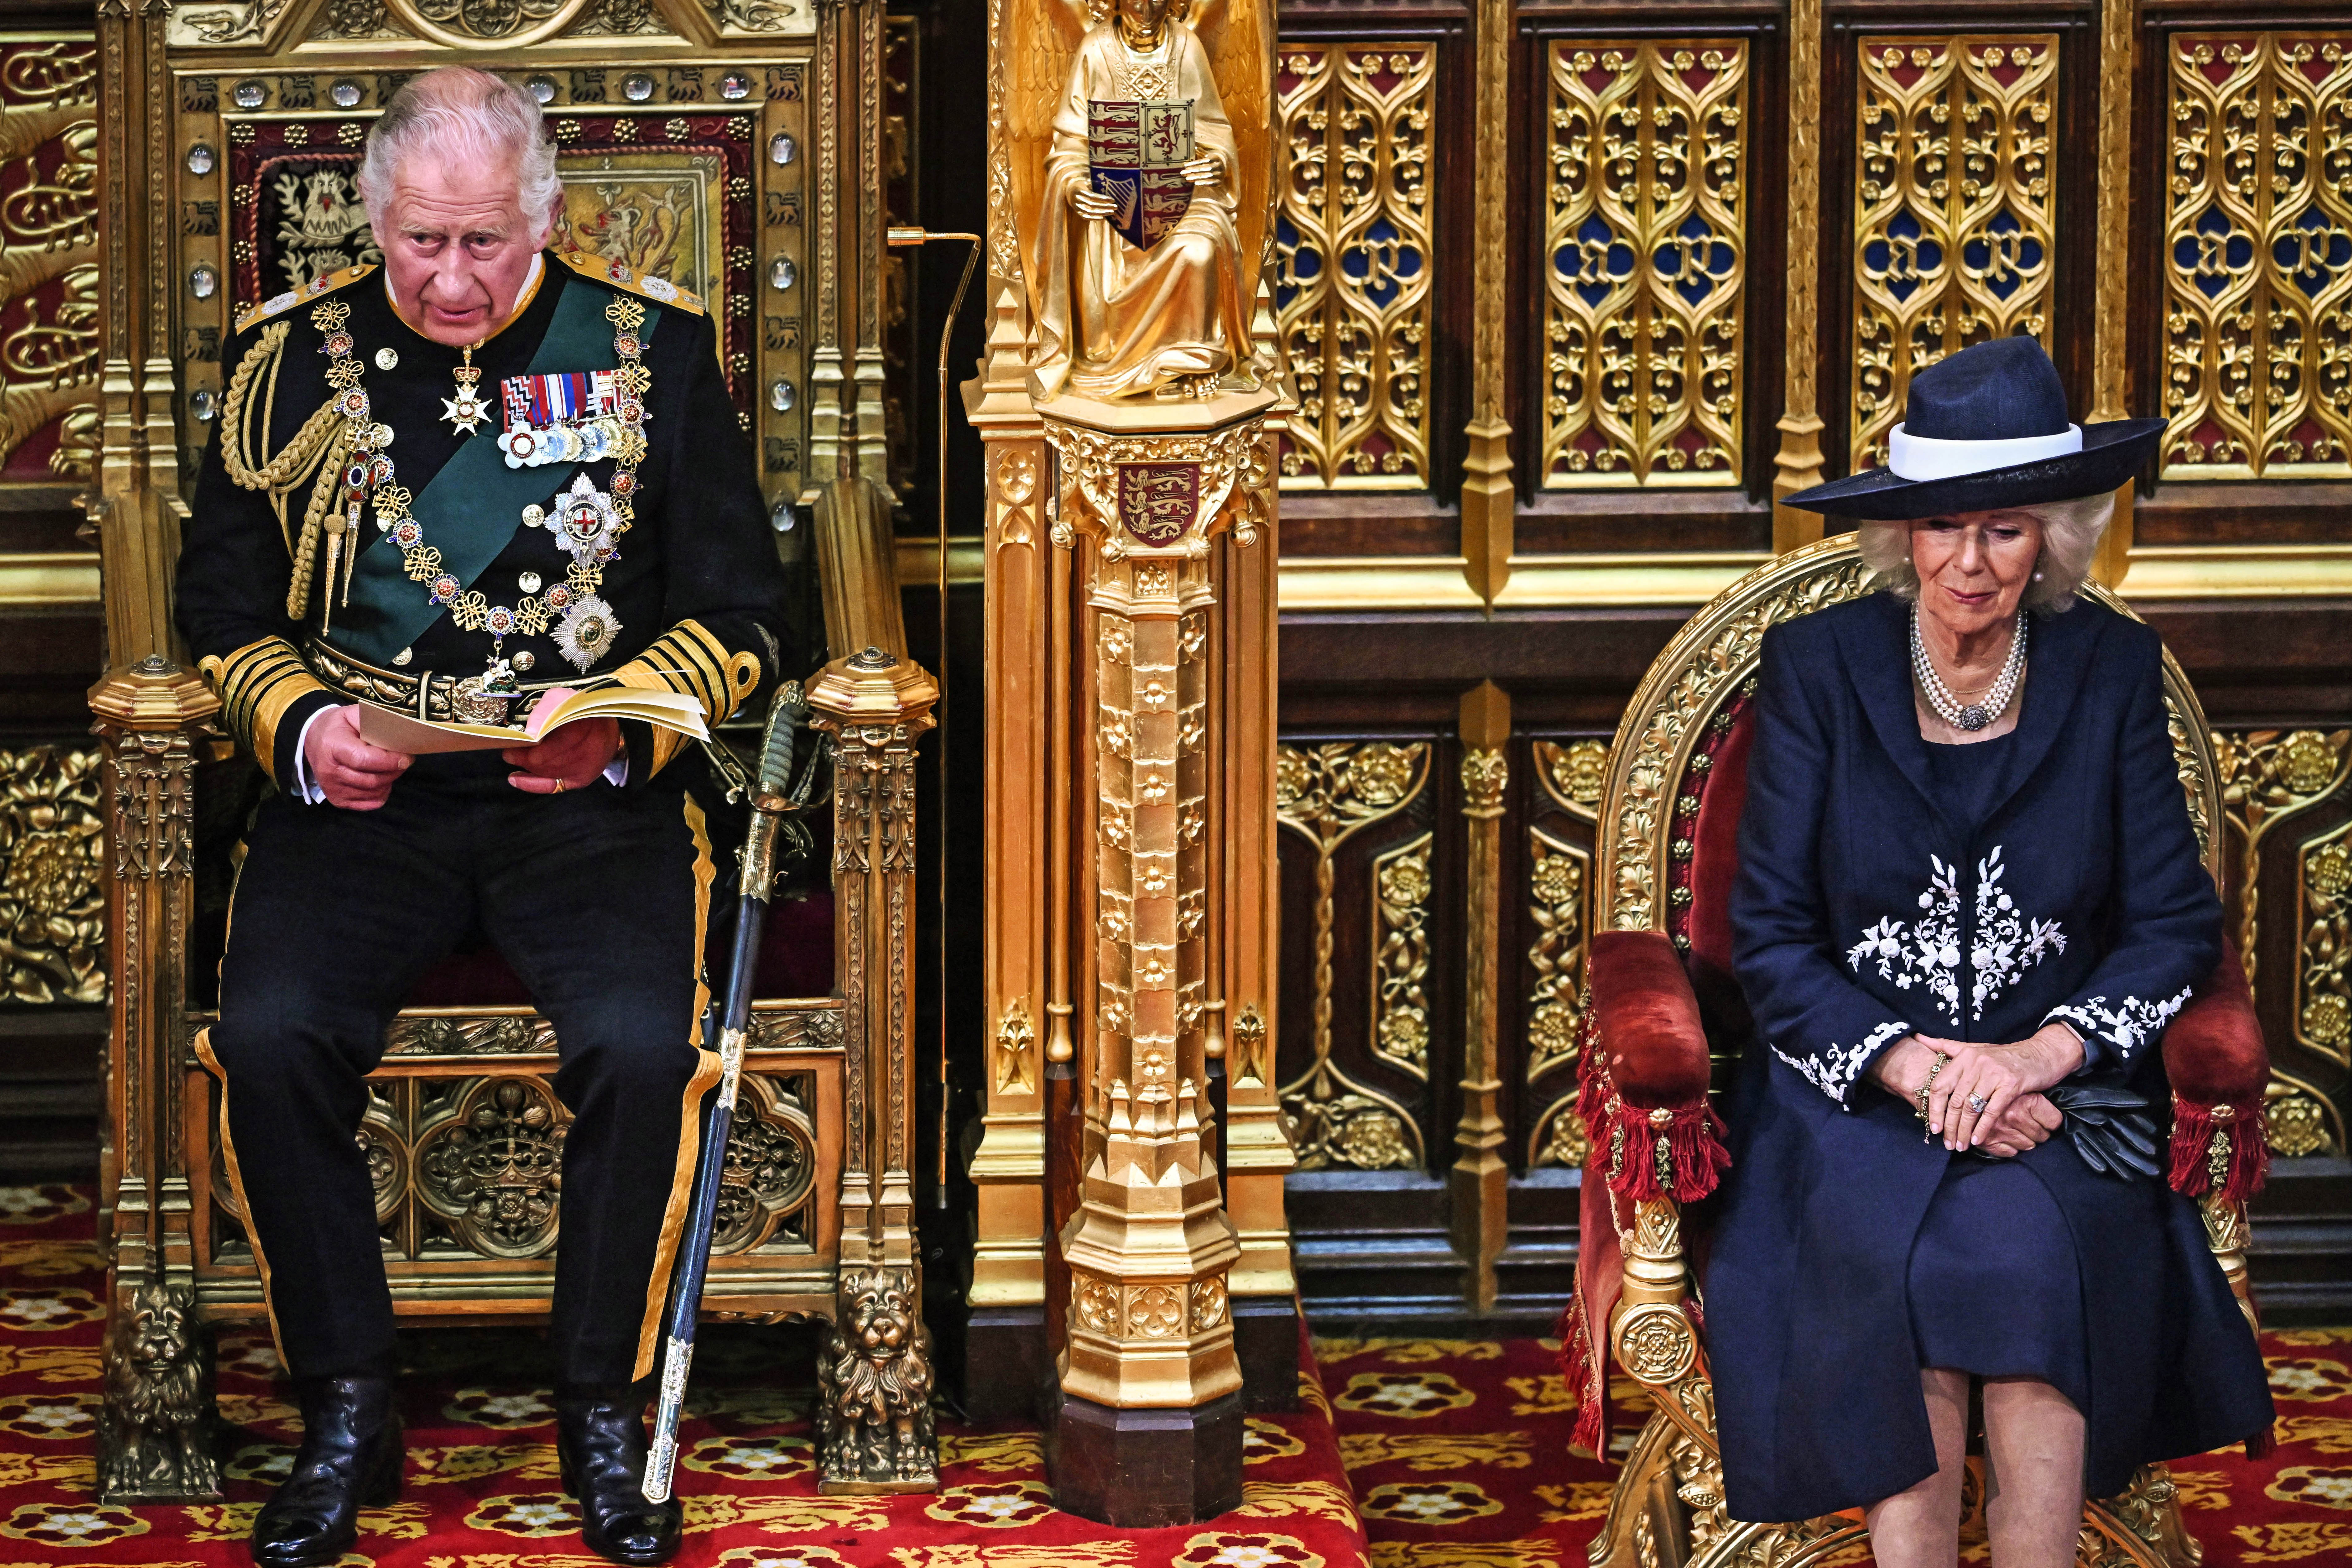 Prince Charles reading the Queen's Speech as he sits by his wife Camilla, Duchess of Cornwall in the House of Lords chamber, during the State Opening of Parliament, at the Palace of Westminster on May 10, 2022 in London, England. | Source: Getty Images